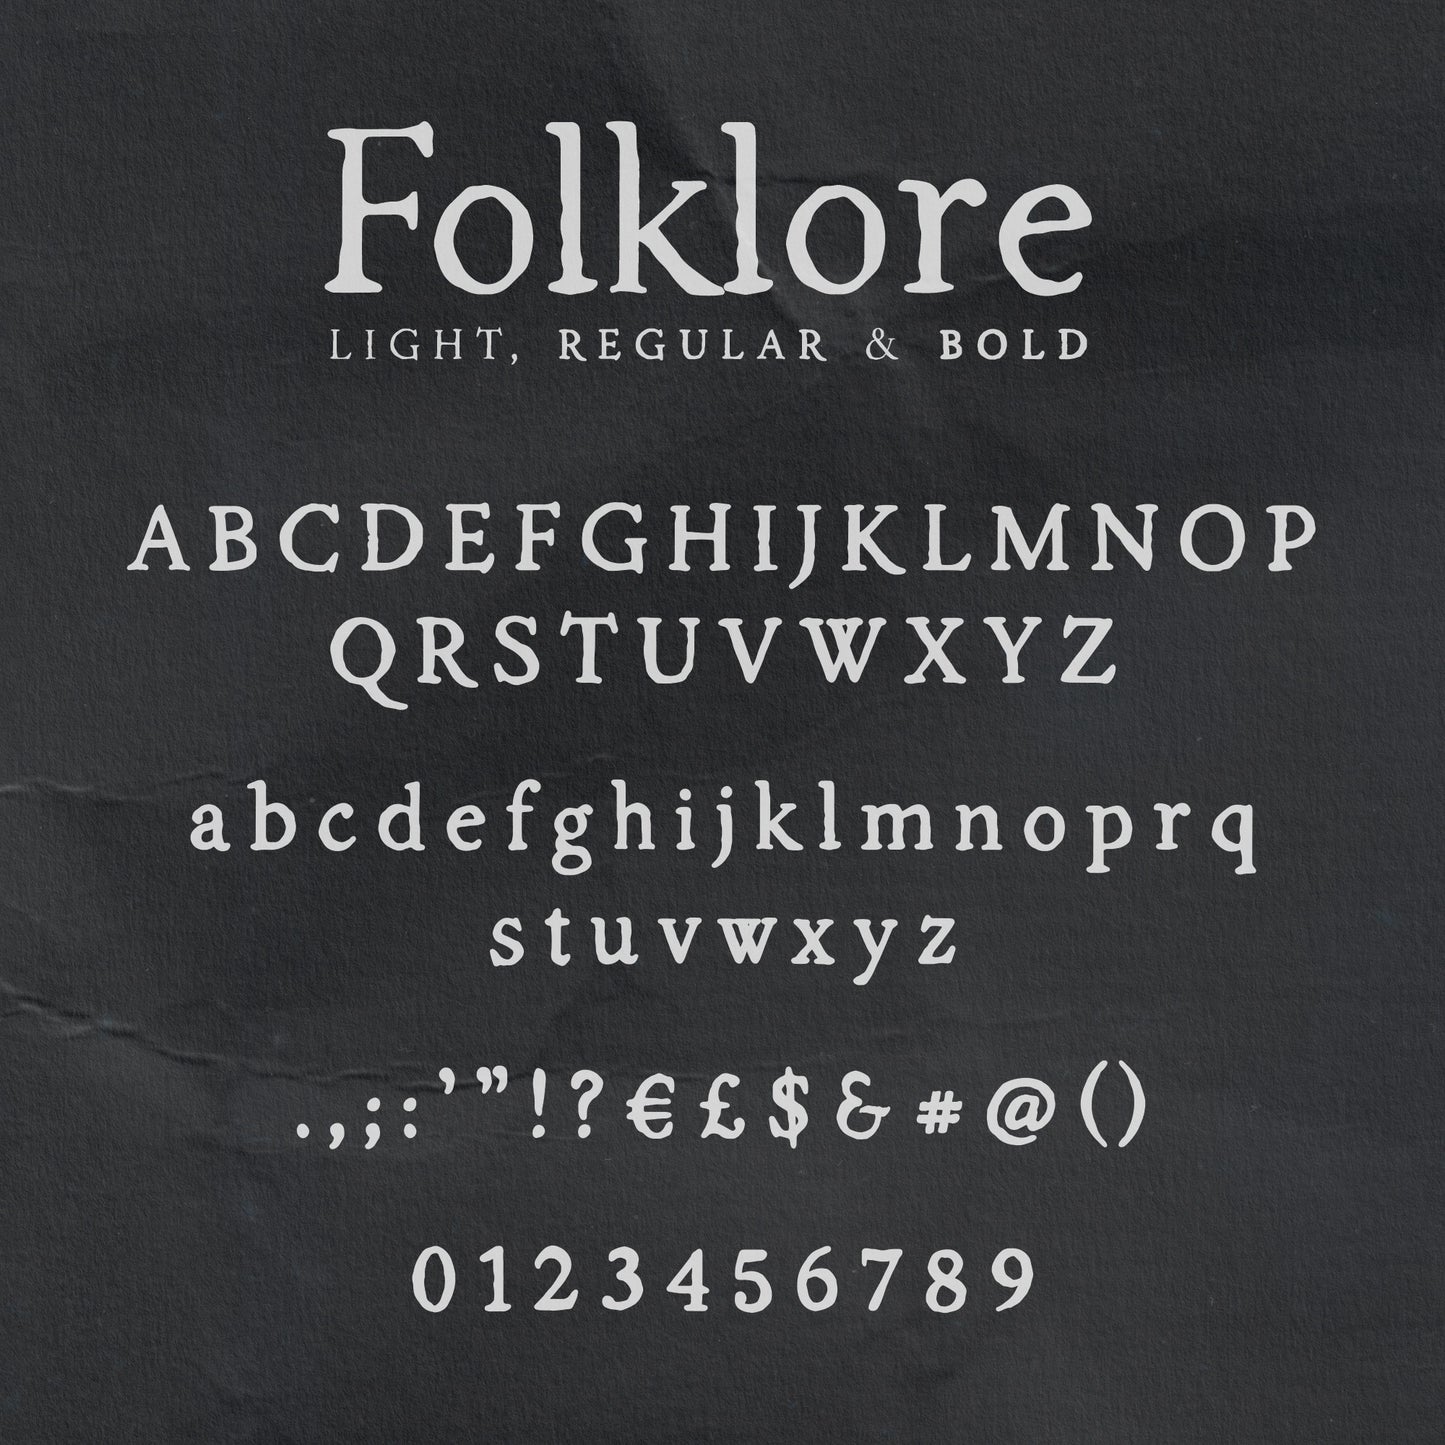 Dark background showing light colour letter samples from the Folklore font